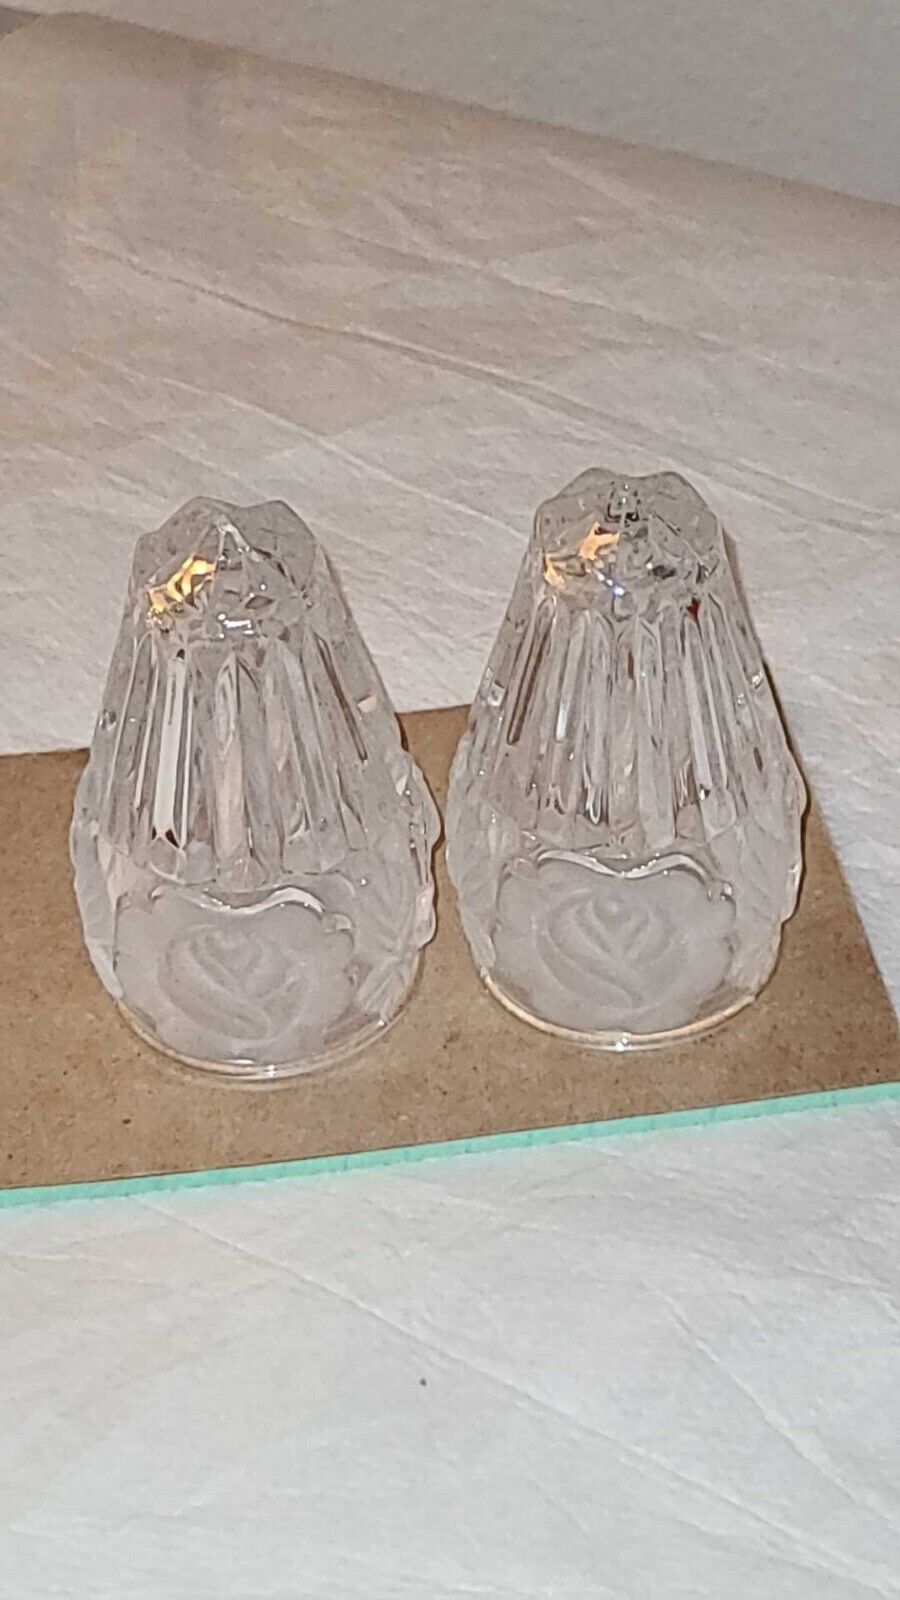 Vintage Salt & Pepper shakers with frosted glass rose design